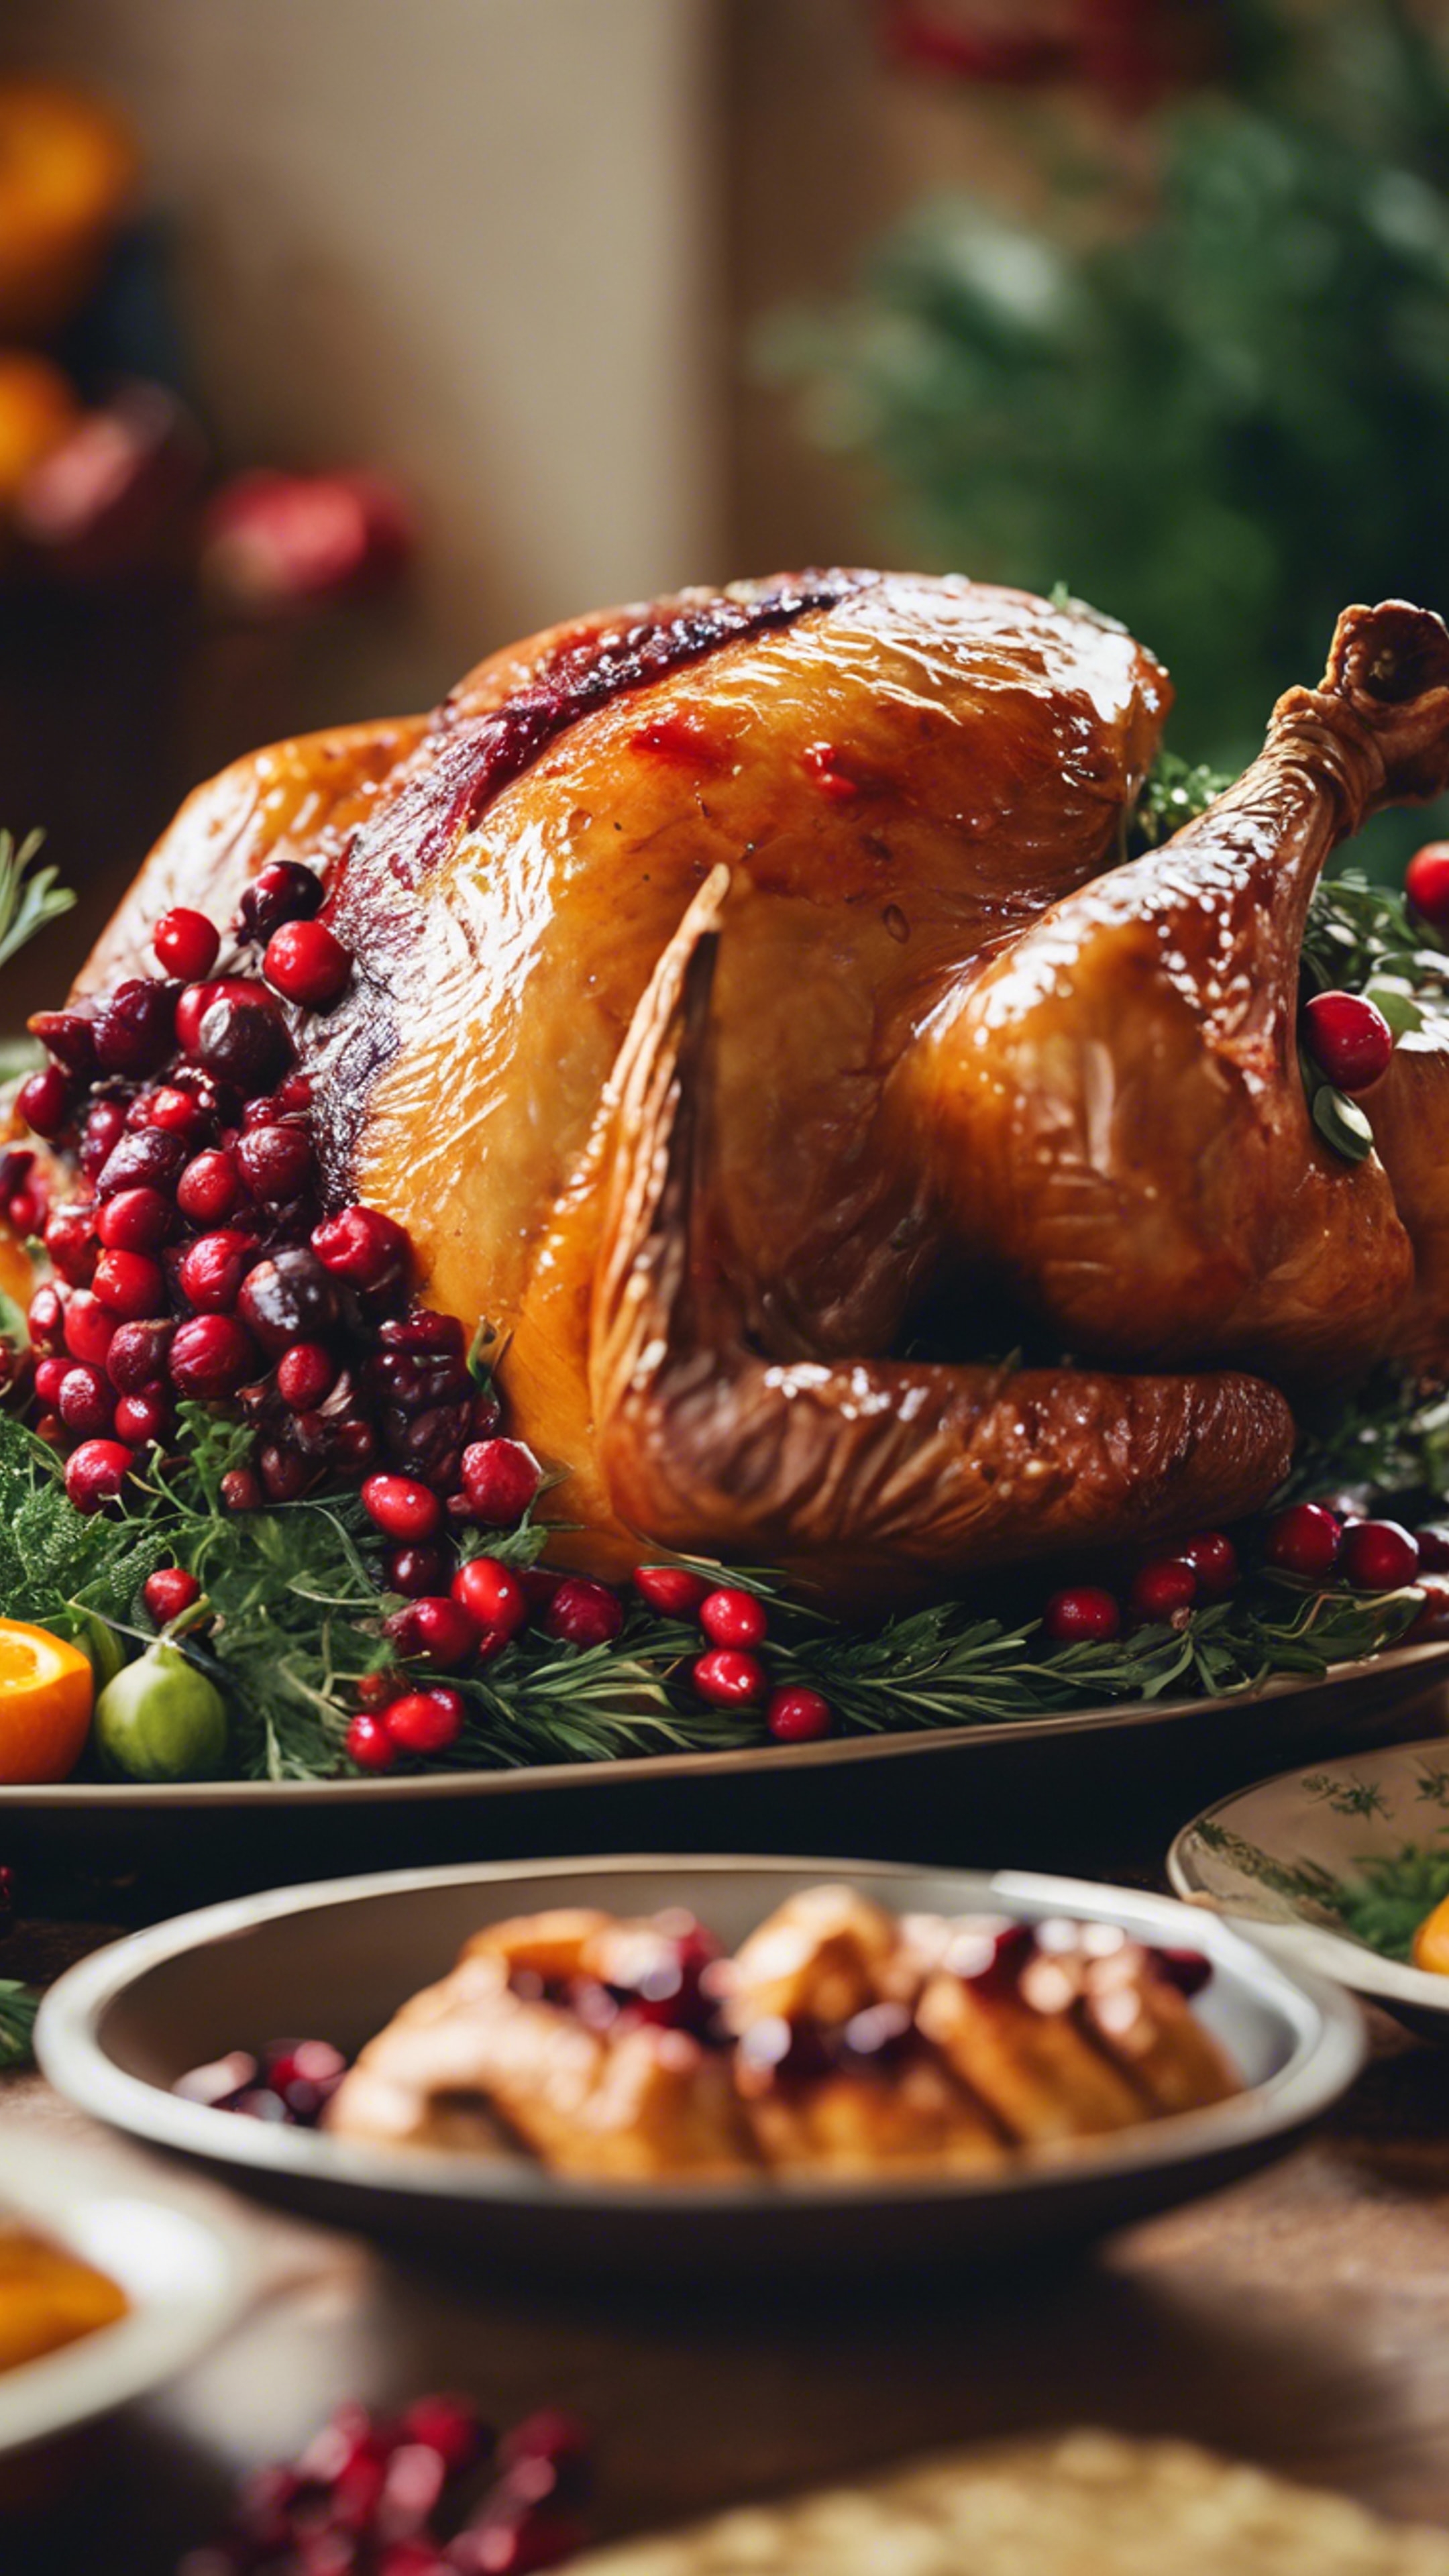 An artistic close-up of a traditional roast turkey on a Thanksgiving table, garnished with cranberries and herbs. טפט[f7ada081b7d5471b890d]